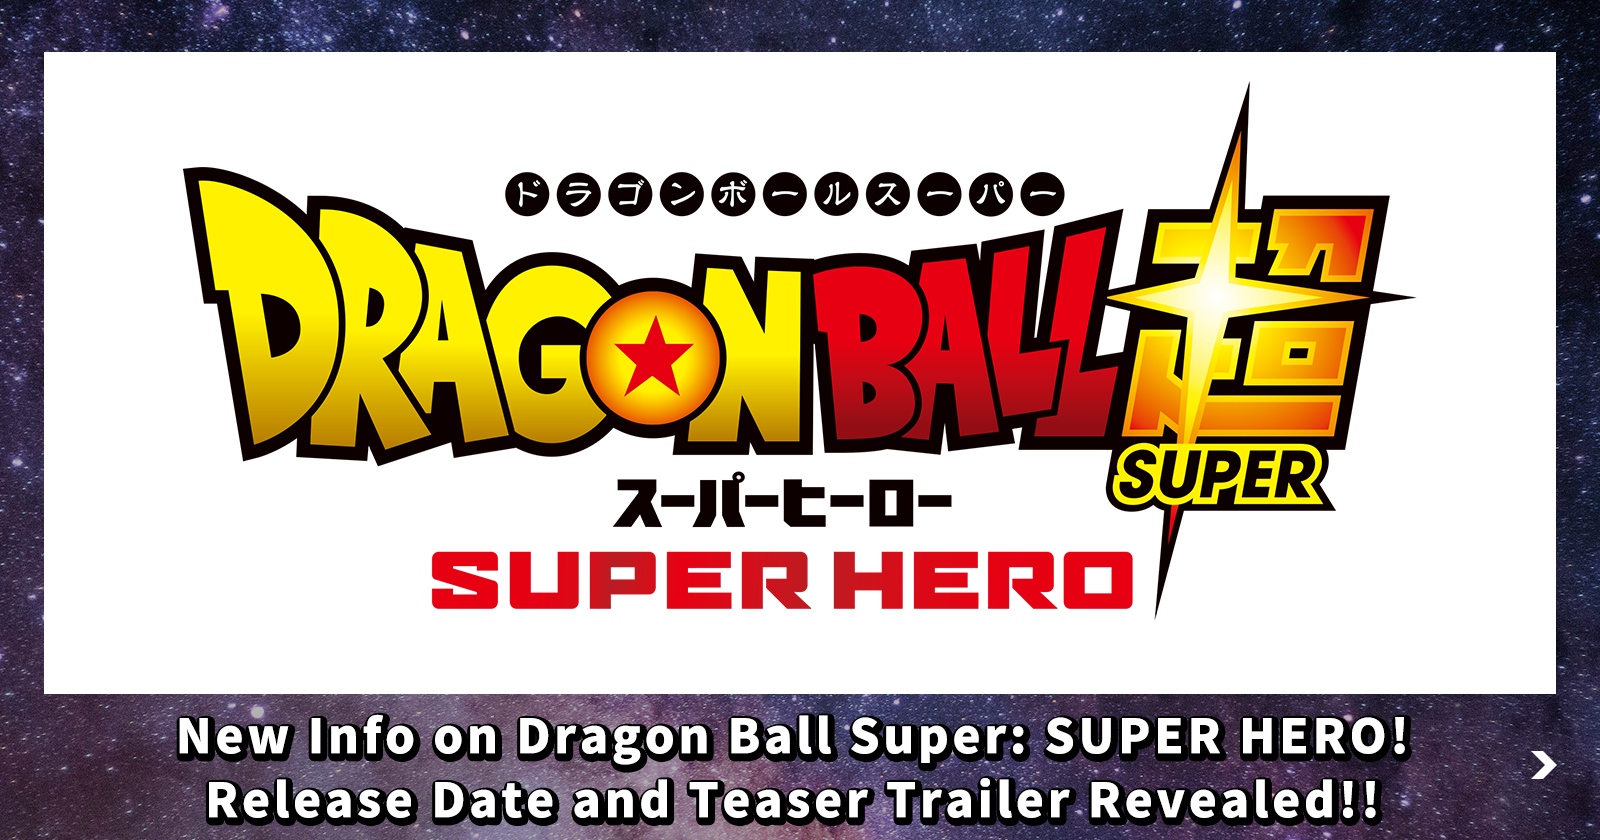 New Info on Dragon Ball Super: SUPER HERO! Release Date and Teaser Trailer Revealed!!